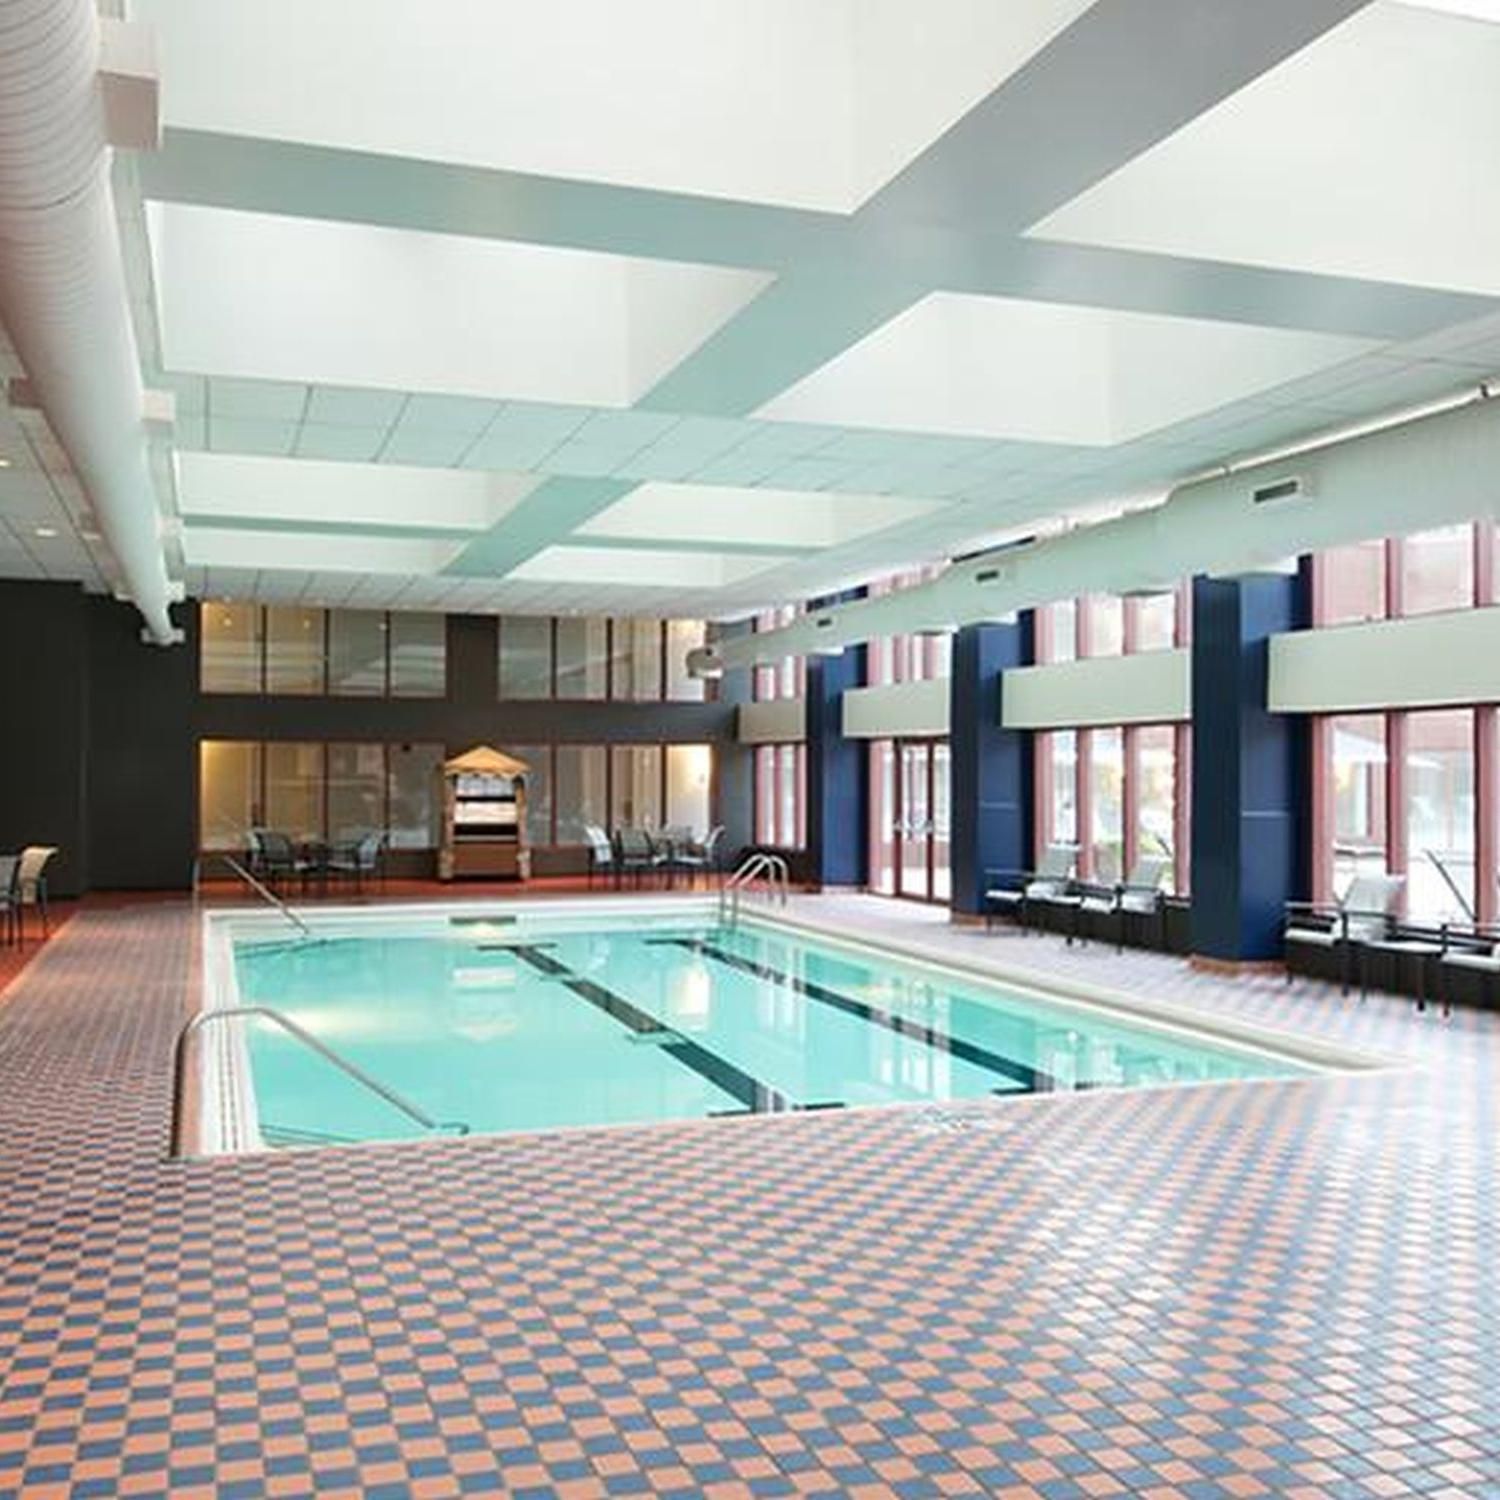 Have a morning or afternoon dip in our Indoor Pool